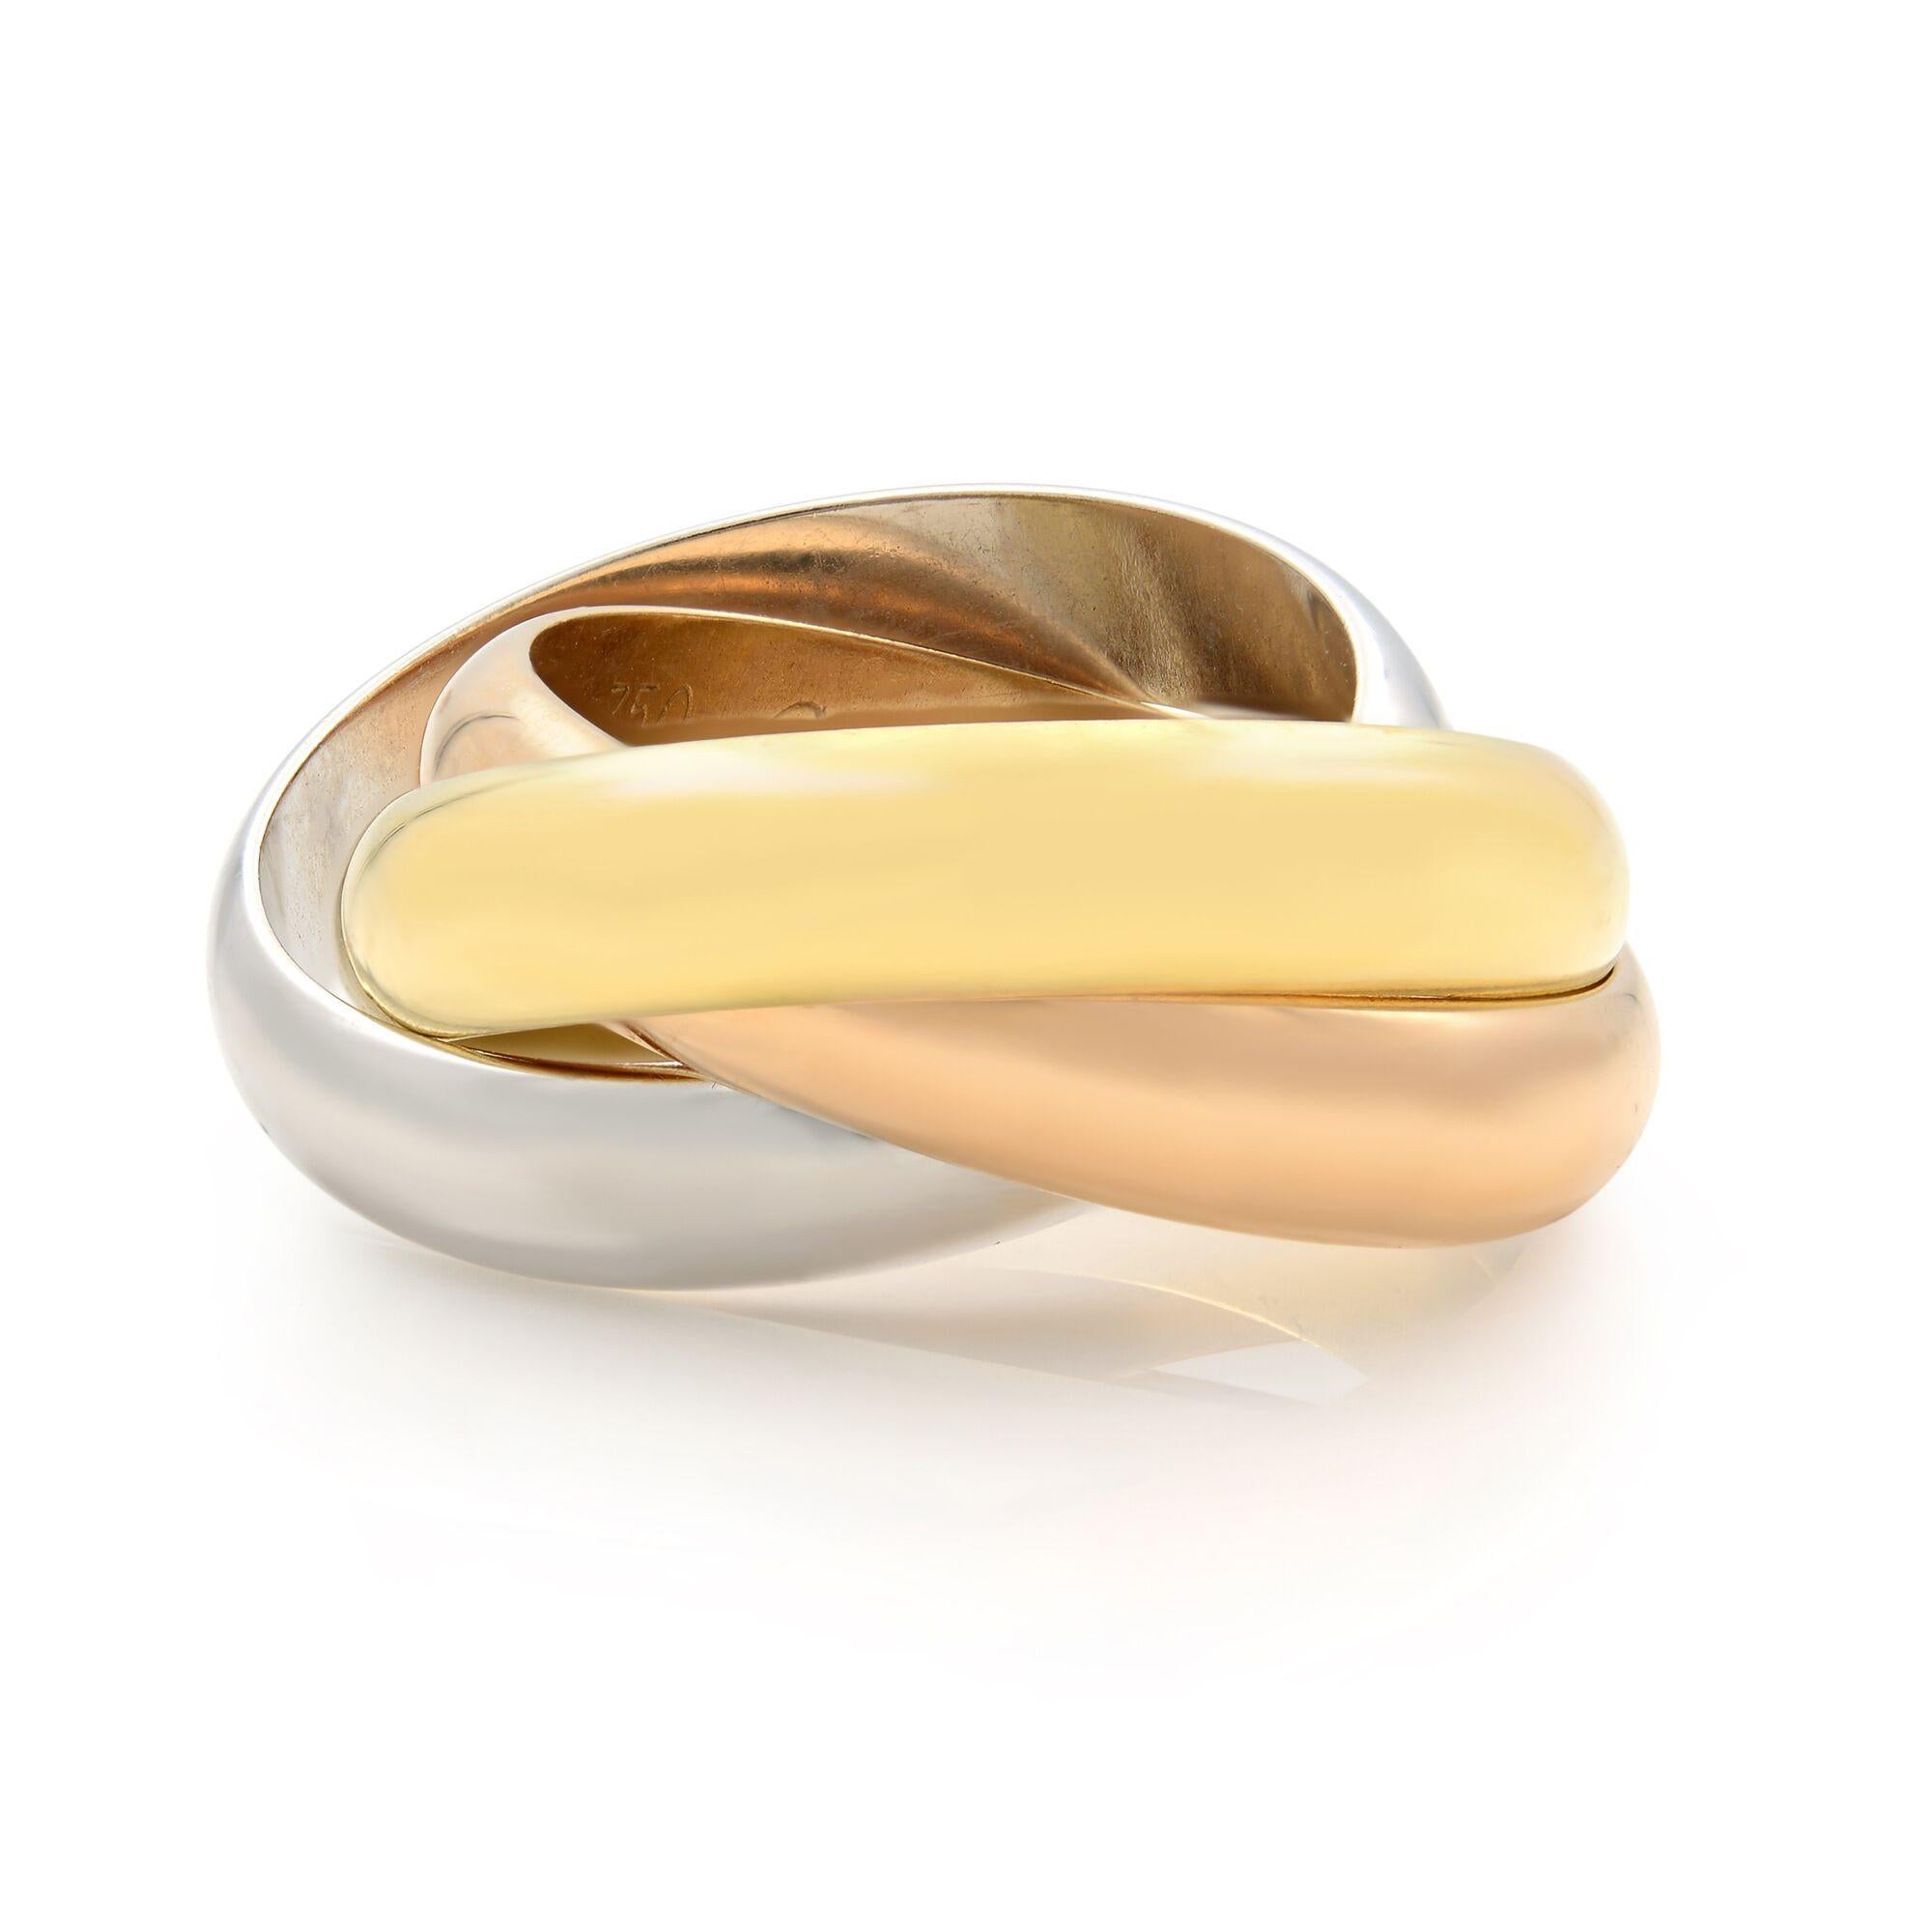 Trinity ring from Cartier, crafted in 18K white gold, pink gold and yellow gold. The three interlaced bands in pink, yellow and white gold symbolize love, fidelity and friendship. This Cartier Trinity ring is pre-owned in a very good condition, old